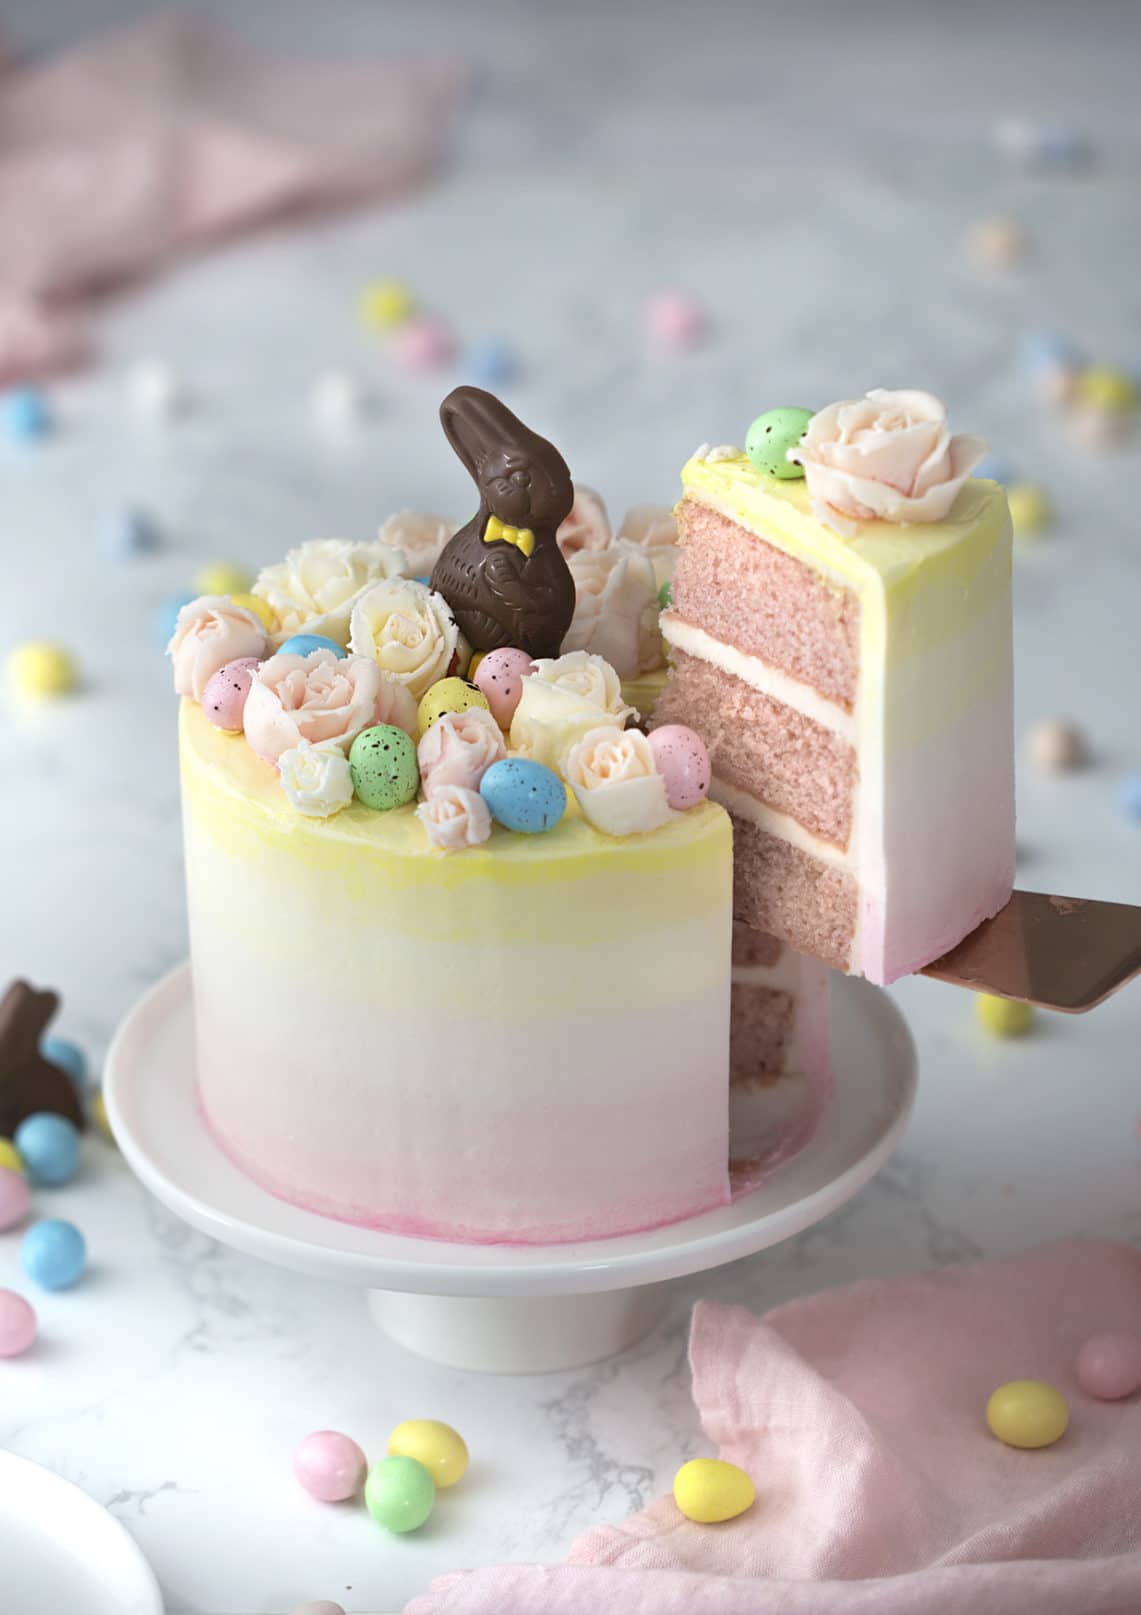 A photo of an Easter bunny cake with buttercream flowers, chocolate eggs and a chocolate Easter bunny on top.